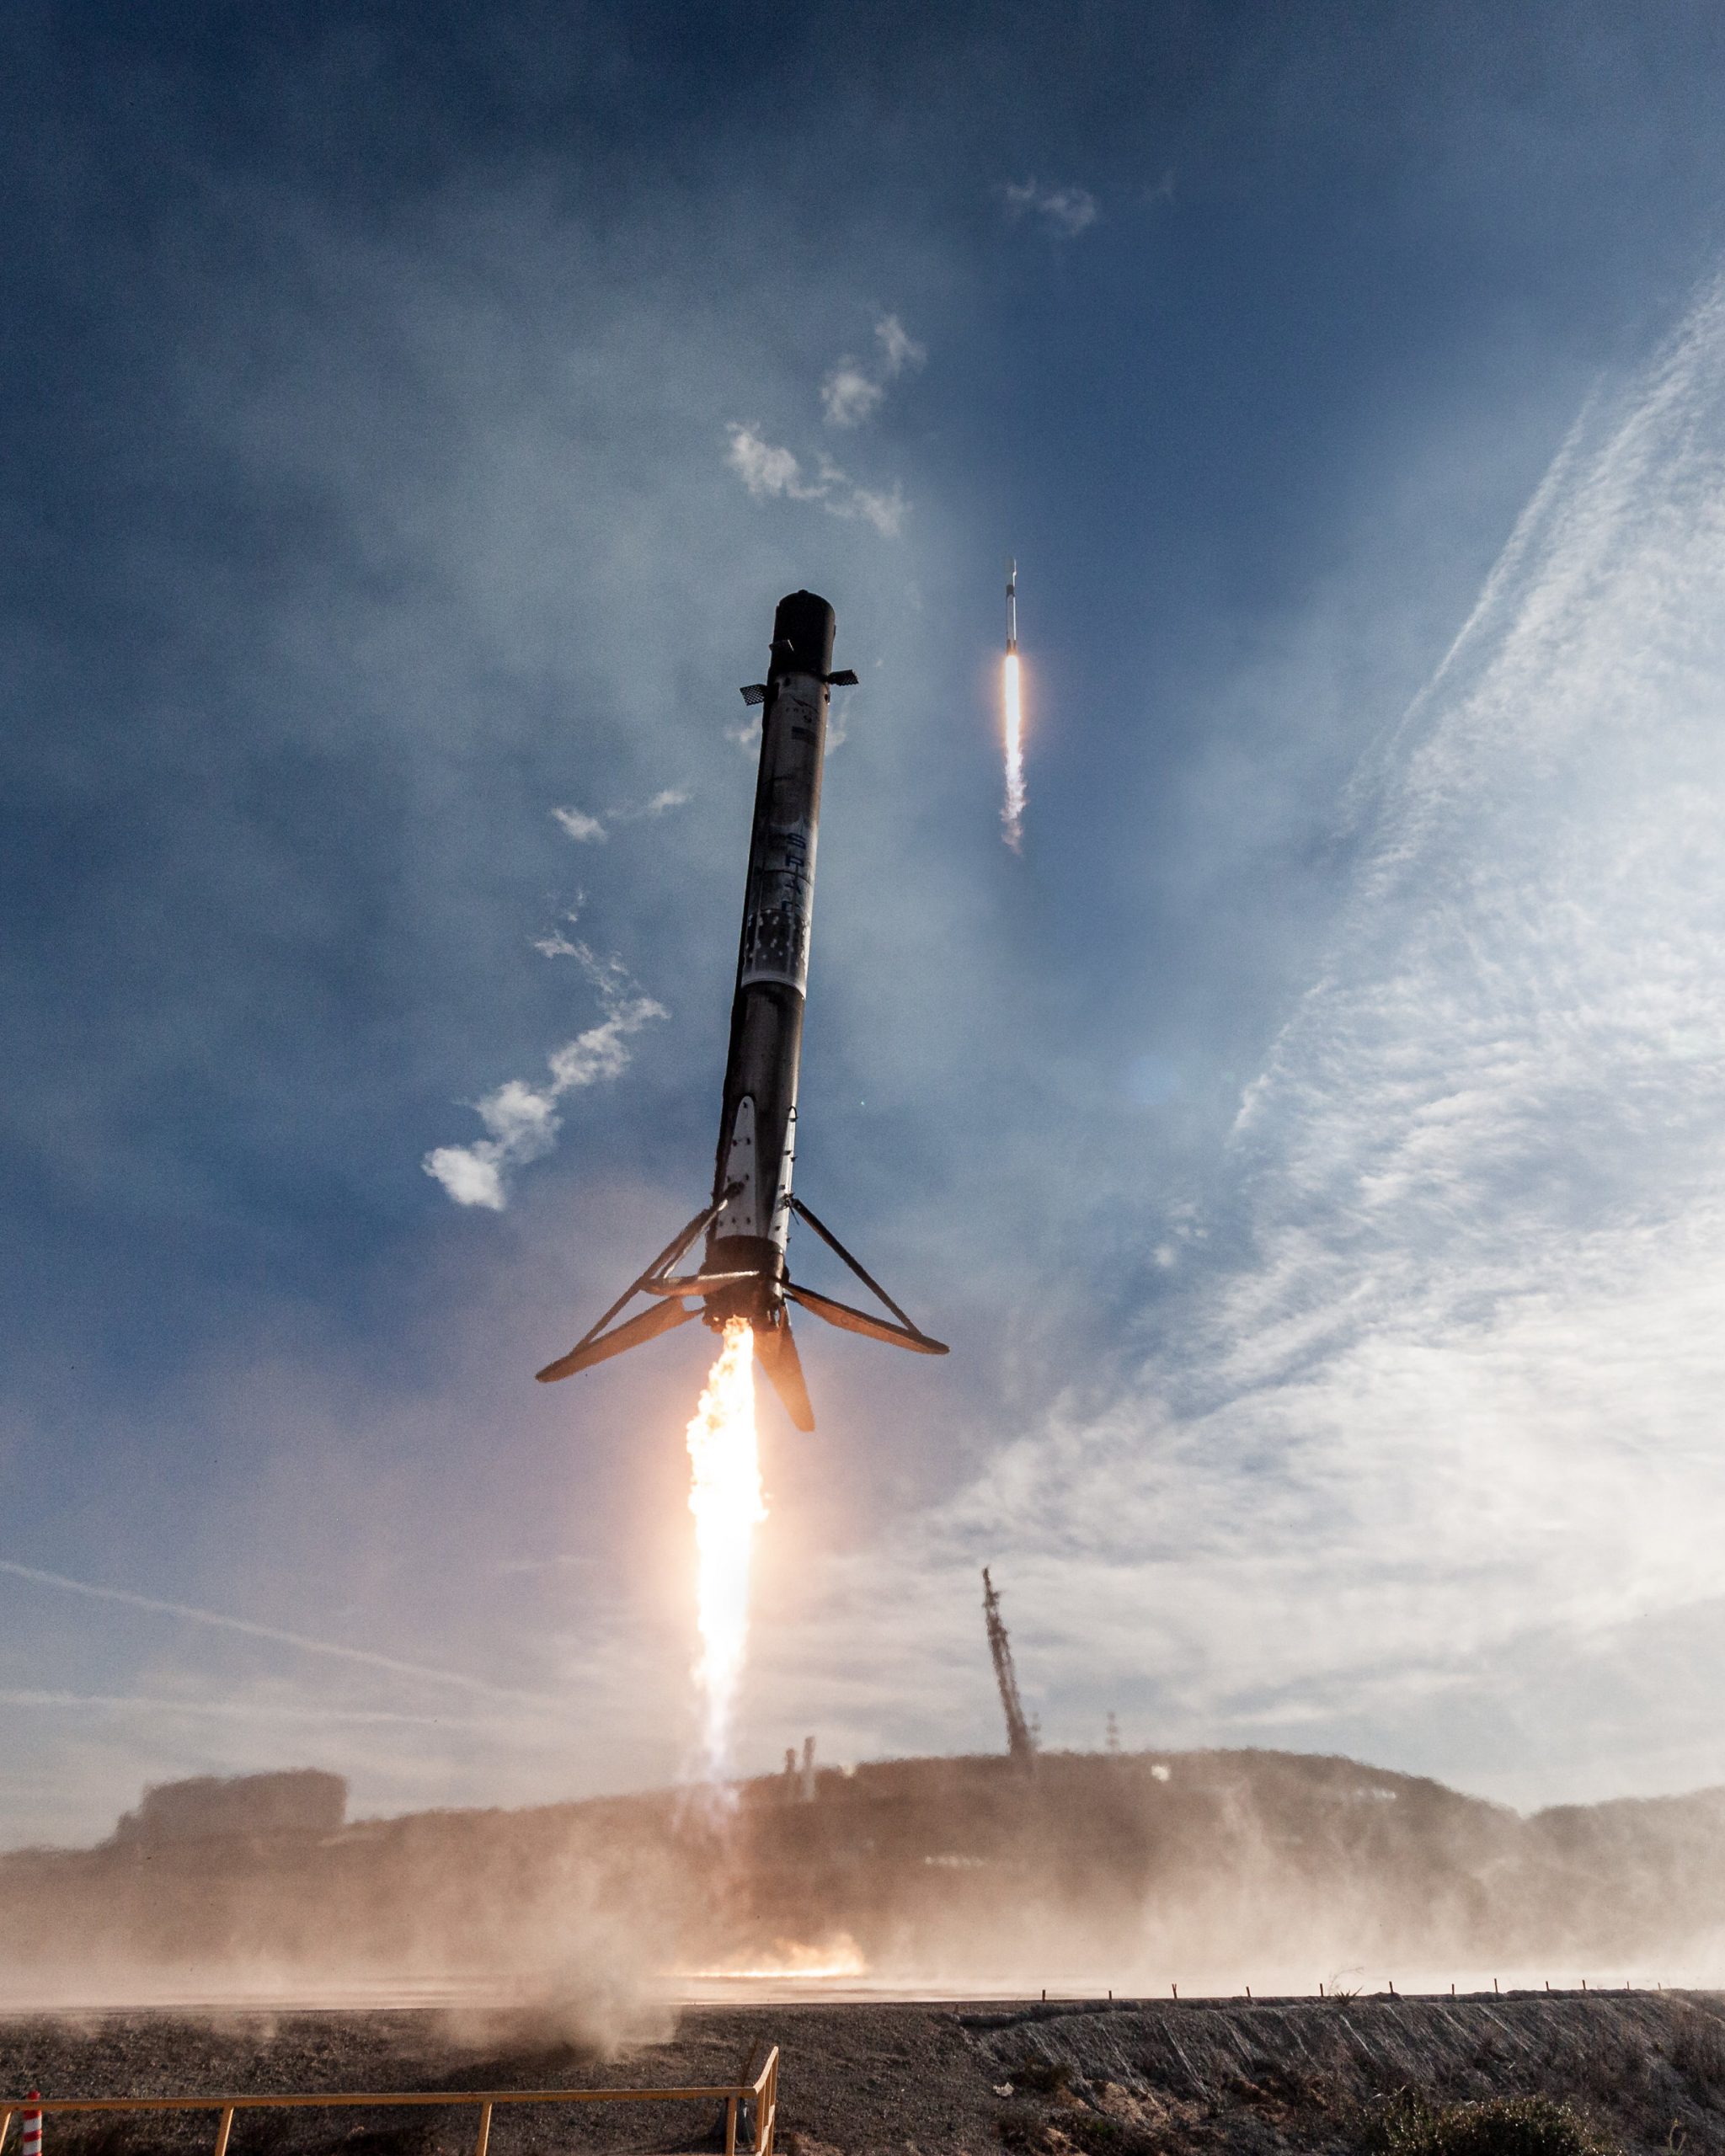 Photograph of the first stage of a Falcon 9 rocket returning to the ground as the rest of the rocket continues to space in the background.